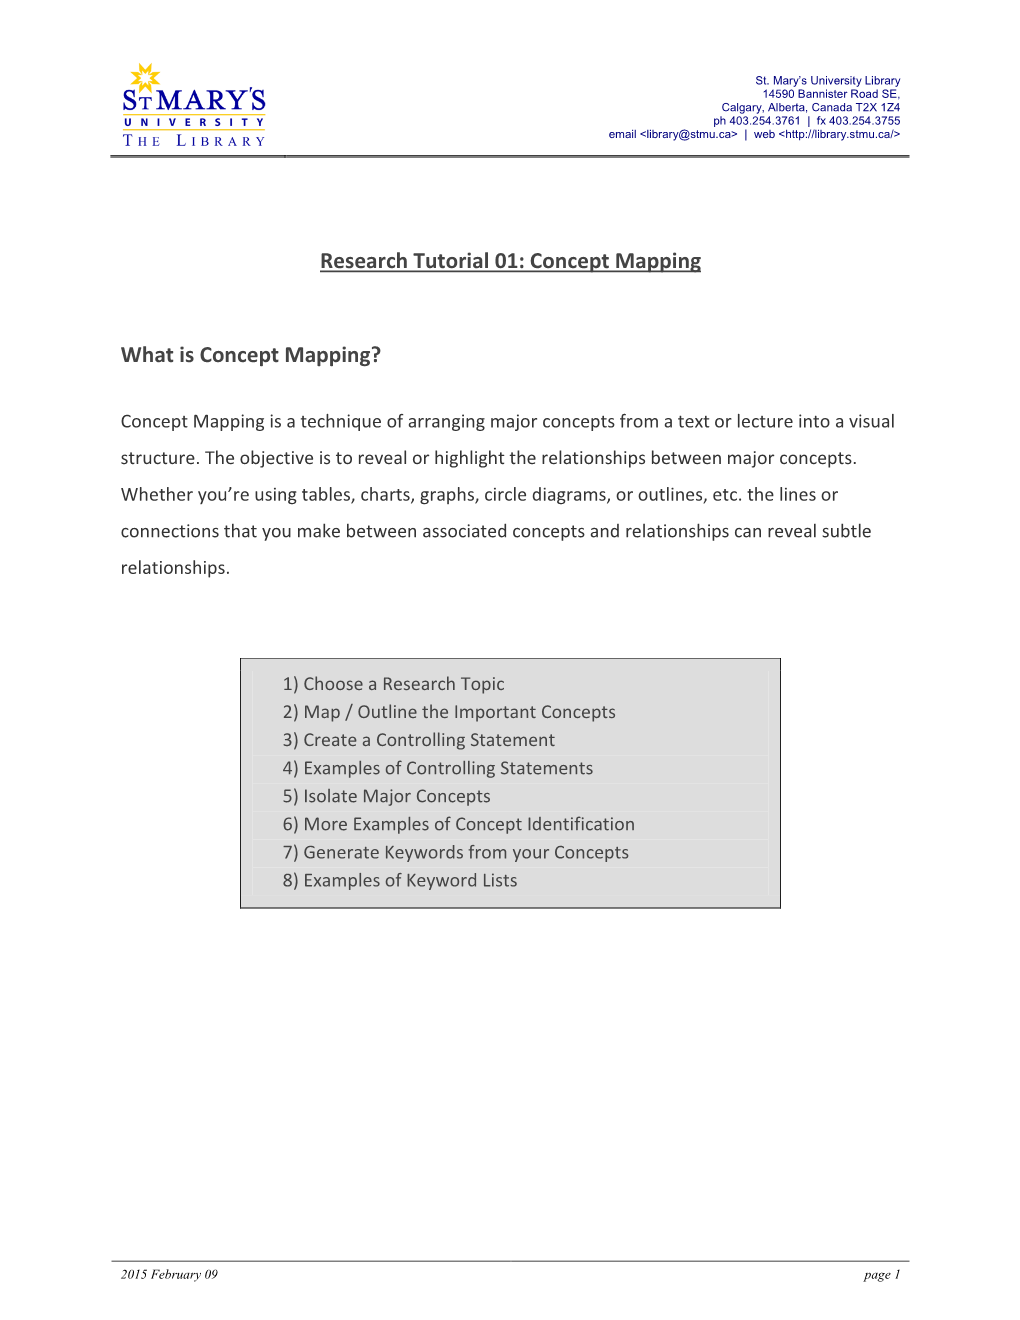 Research Tutorial 01: Concept Mapping